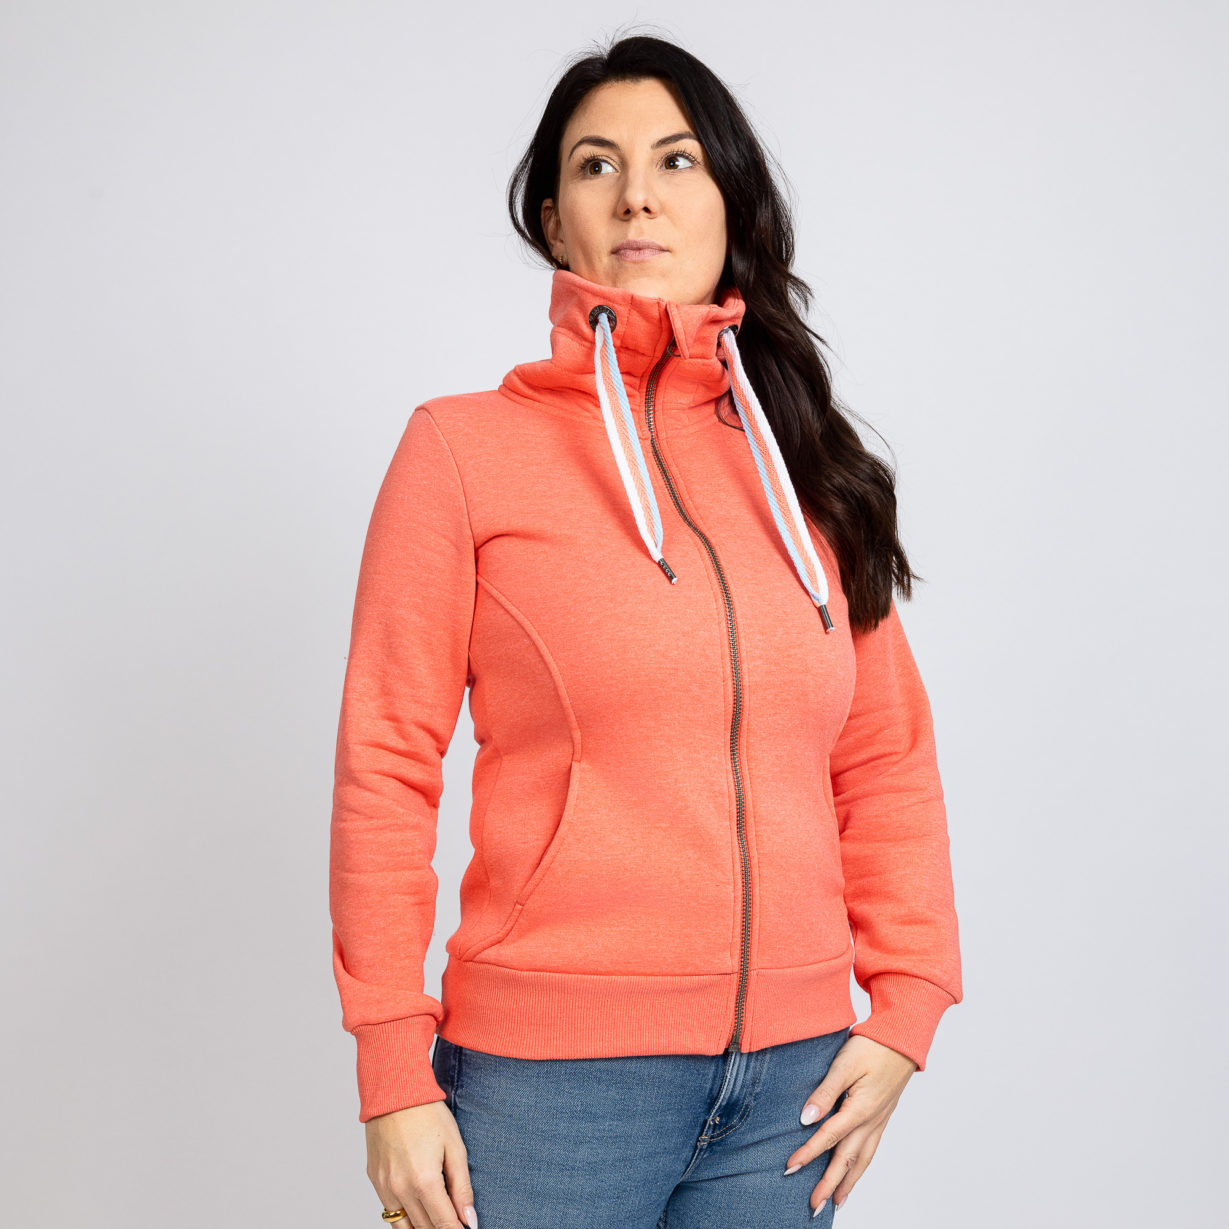 KLENNER - Sweatjacke mit HERE COMES THE SUN Print Model